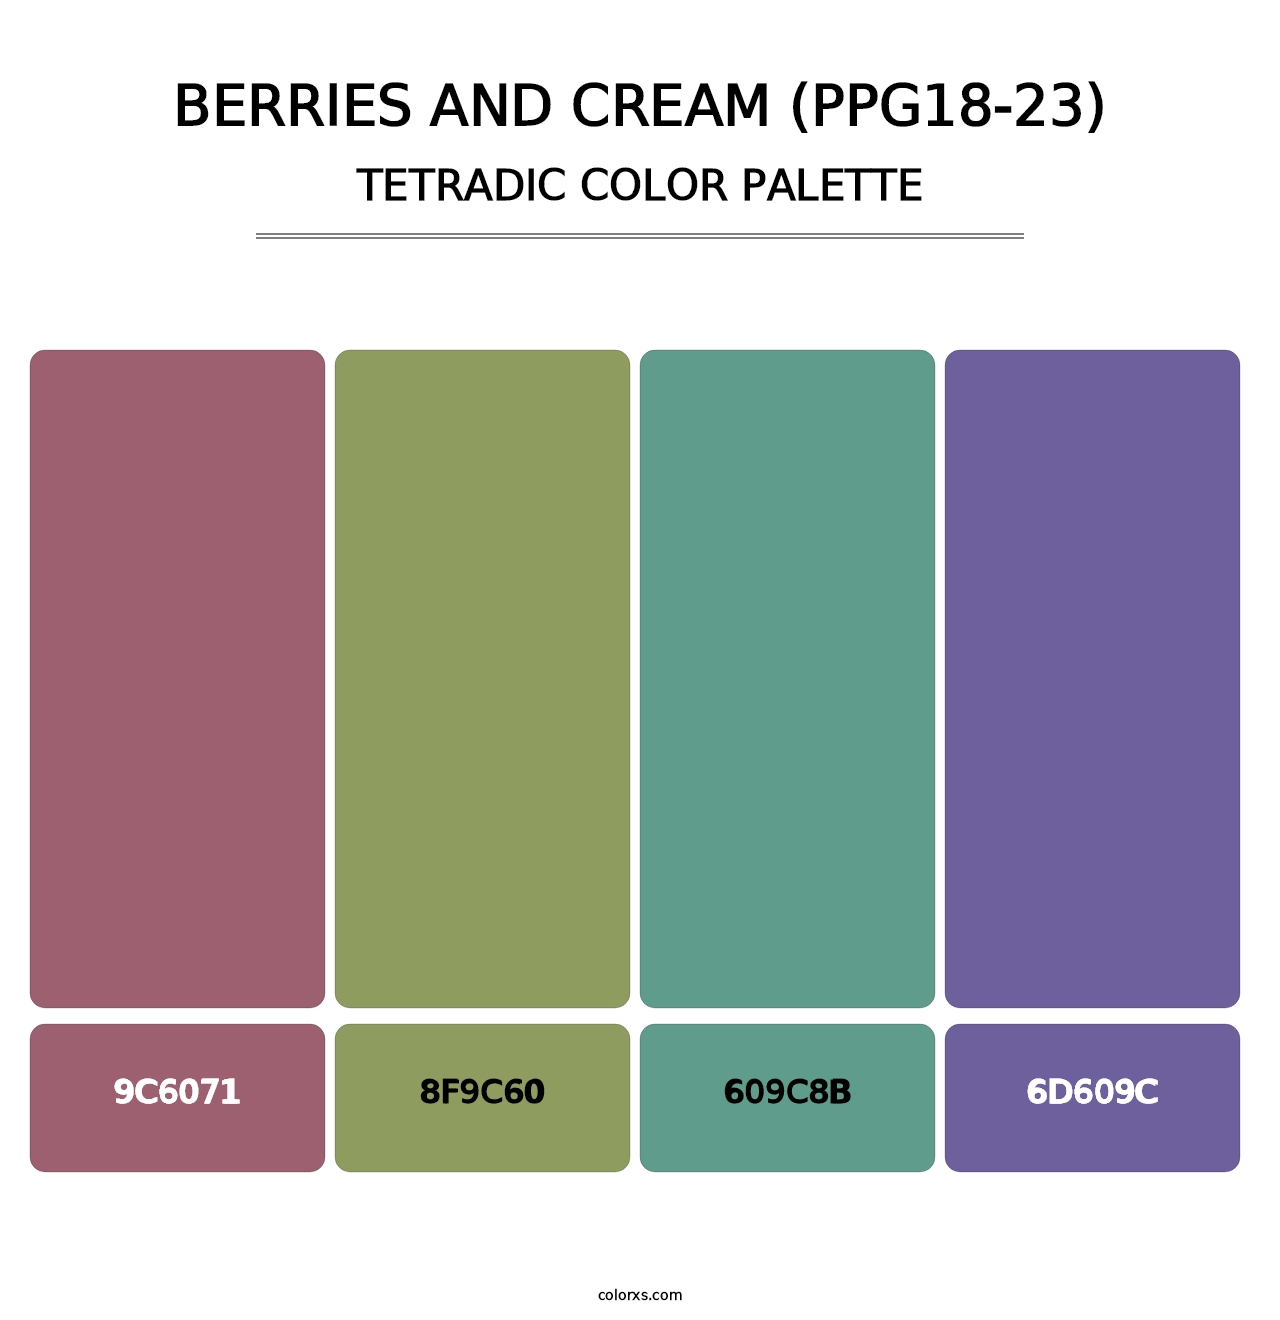 Berries And Cream (PPG18-23) - Tetradic Color Palette